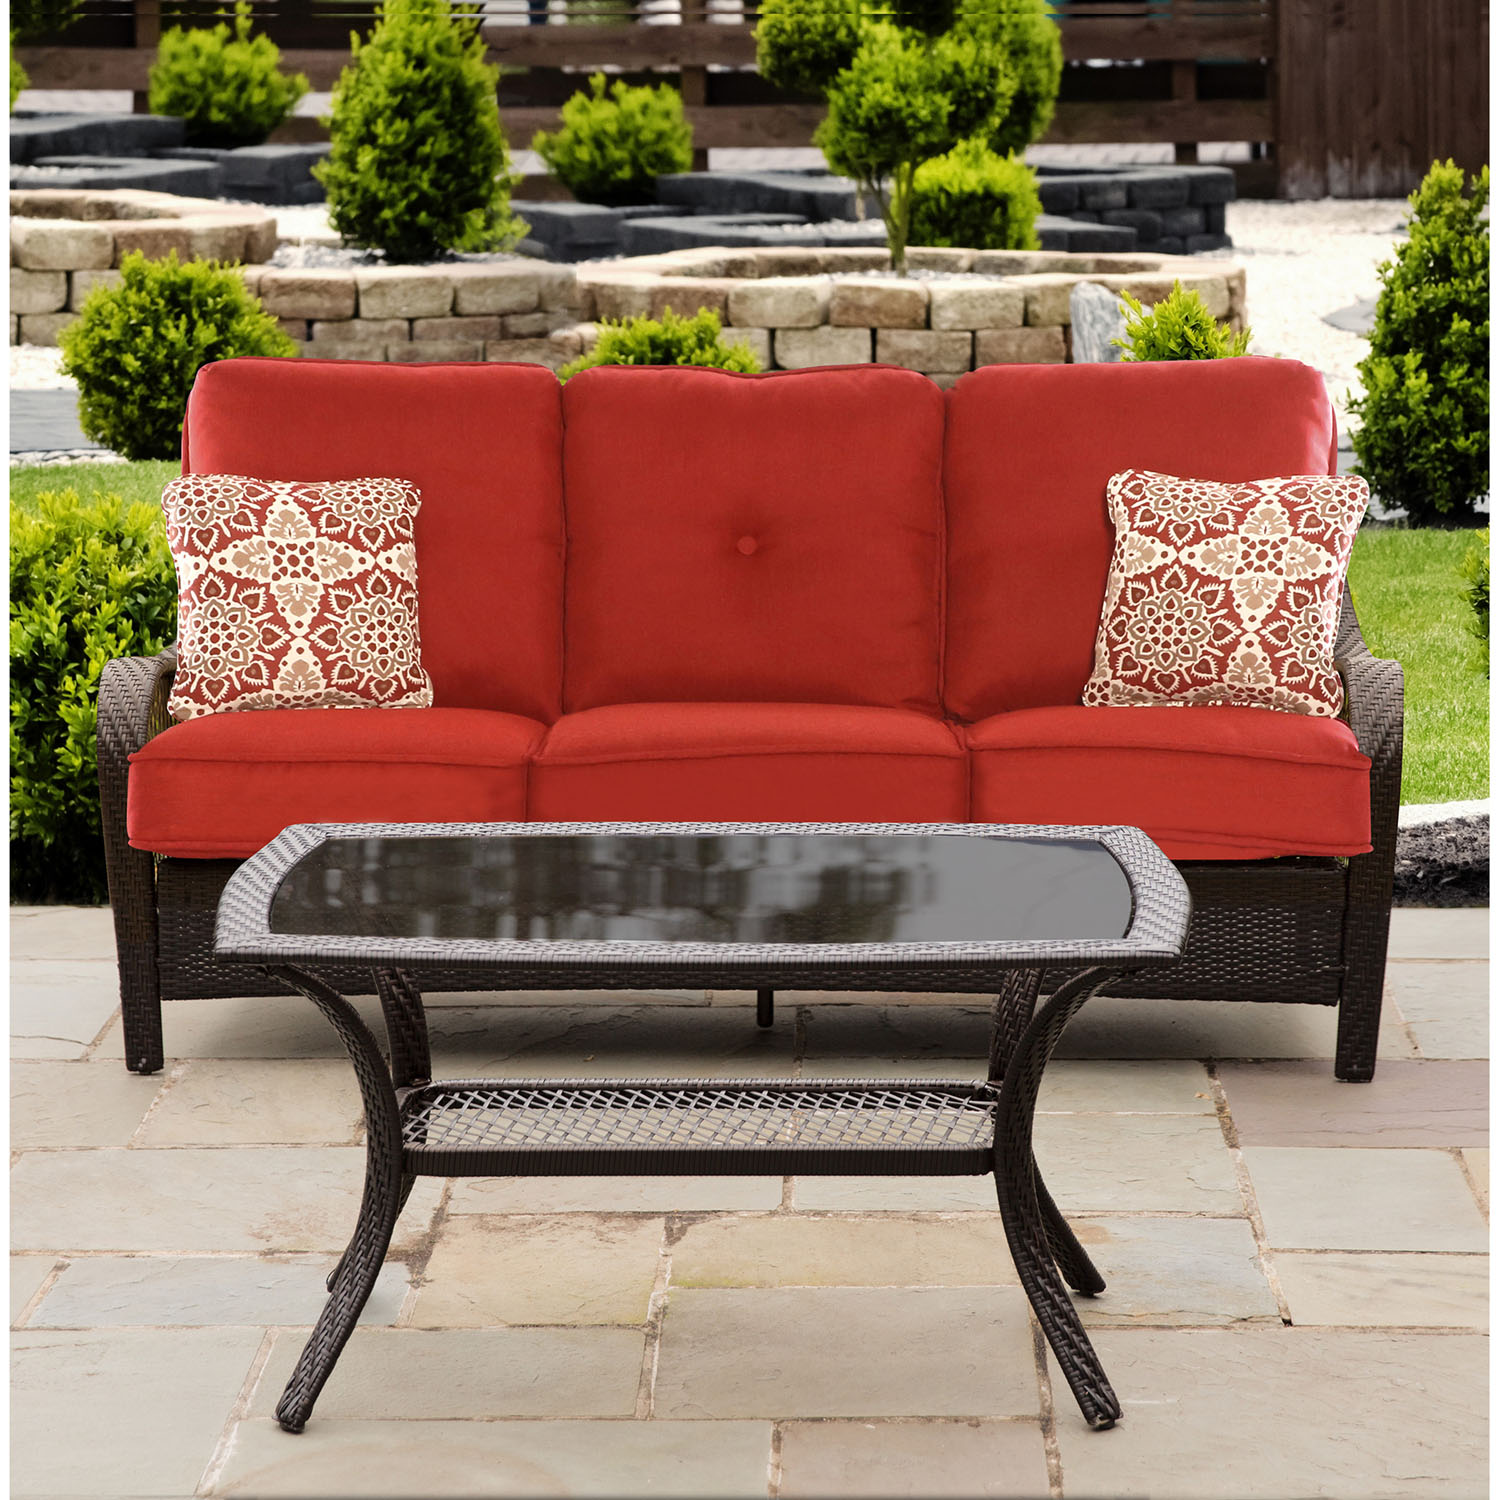 Hanover Orleans 2-Piece Wicker and Steel Outdoor Patio Sofa Set, Autumn Berry - image 4 of 5